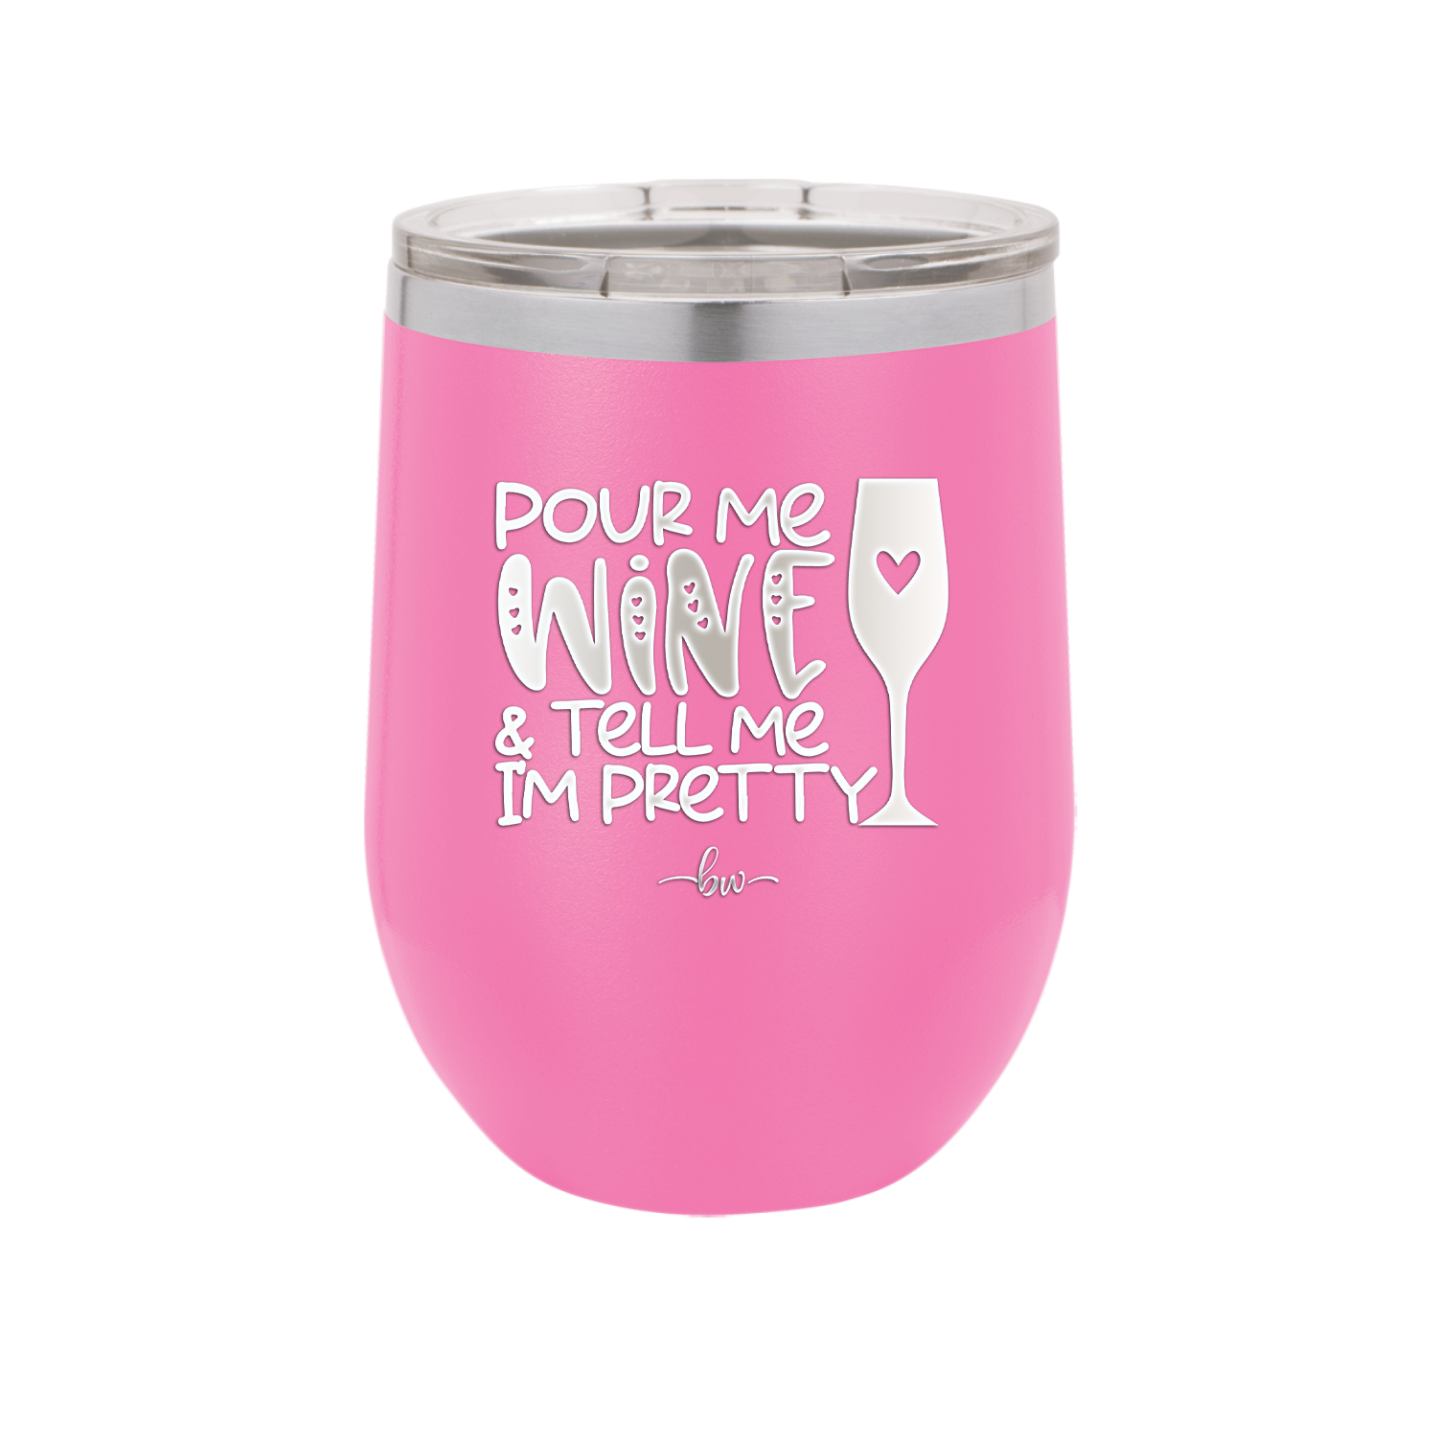 Pour Me Wine and Tell Me I'm Pretty - Laser Engraved Stainless Steel Drinkware - 2500 -